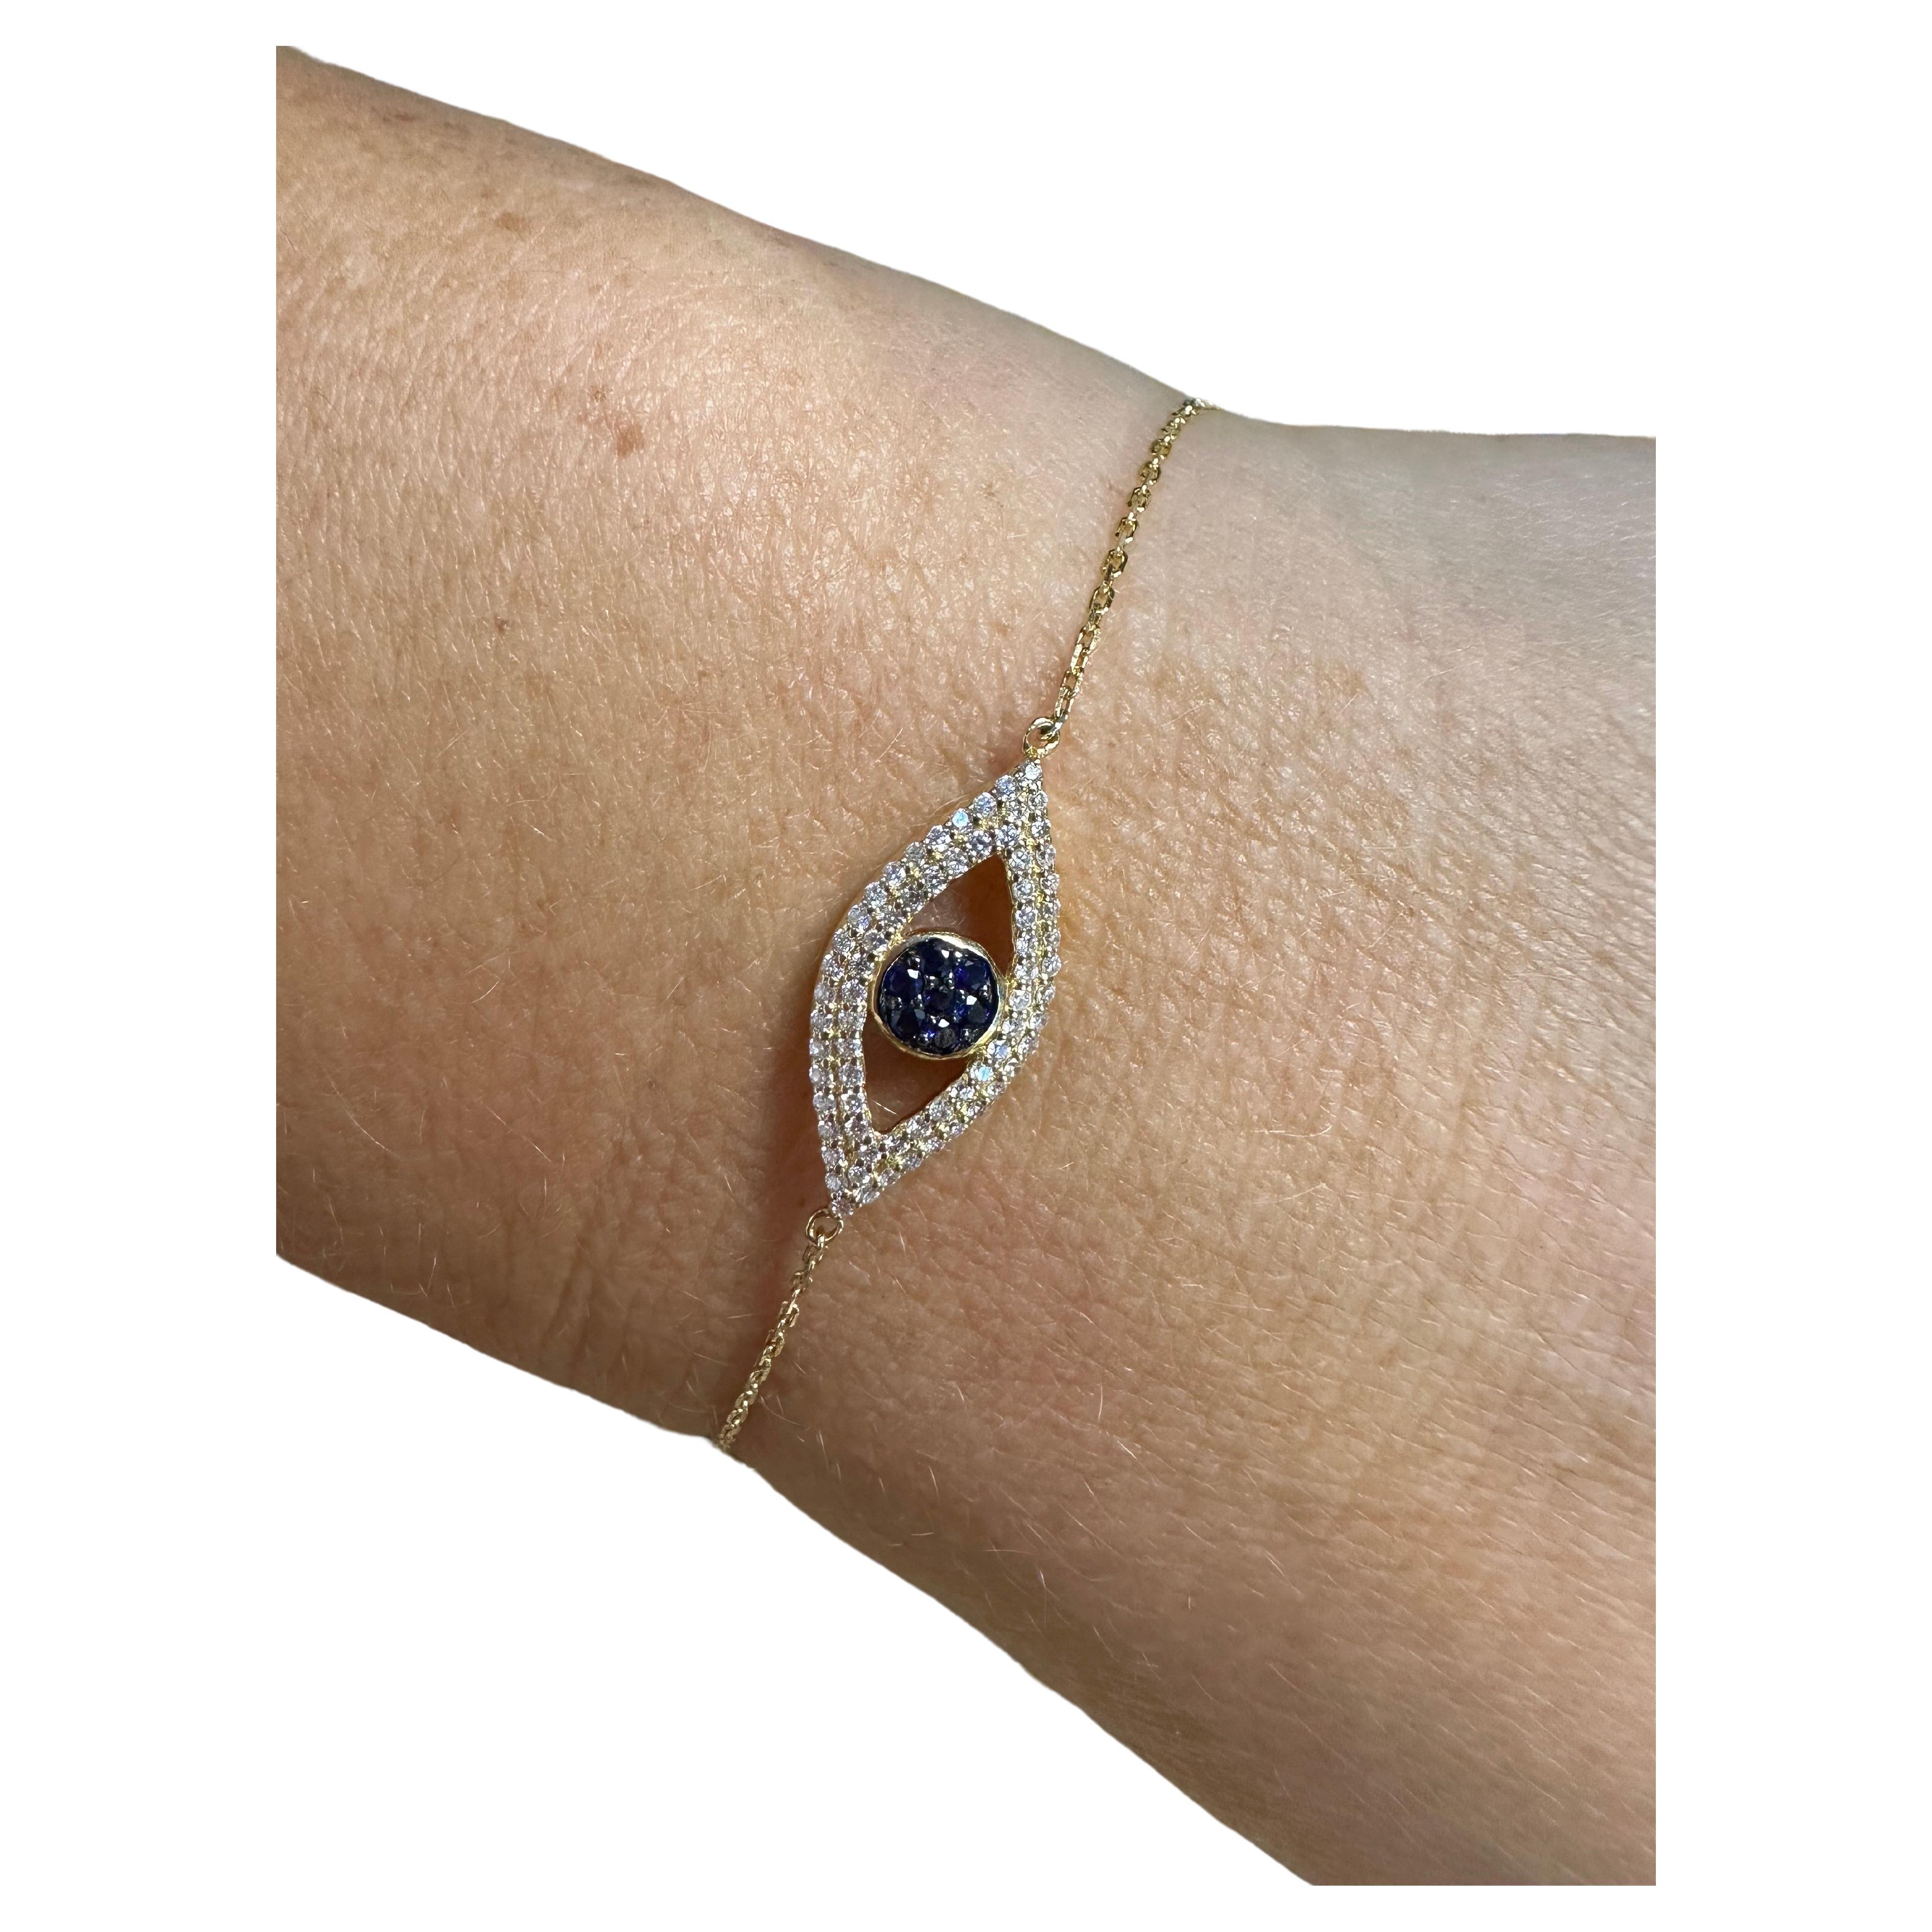 Dainty Evil Eye diamond bracelet in 14KT gold.

Metal Type: 14KT
Small sapphires:0.10ct (natural)
Natural Diamond(s): 
Color: F-G
Cut:Round Brilliant
Carat: 0.25ct
Clarity: VS-SI (average)
Item: T1400
Certificate of authenticity comes with